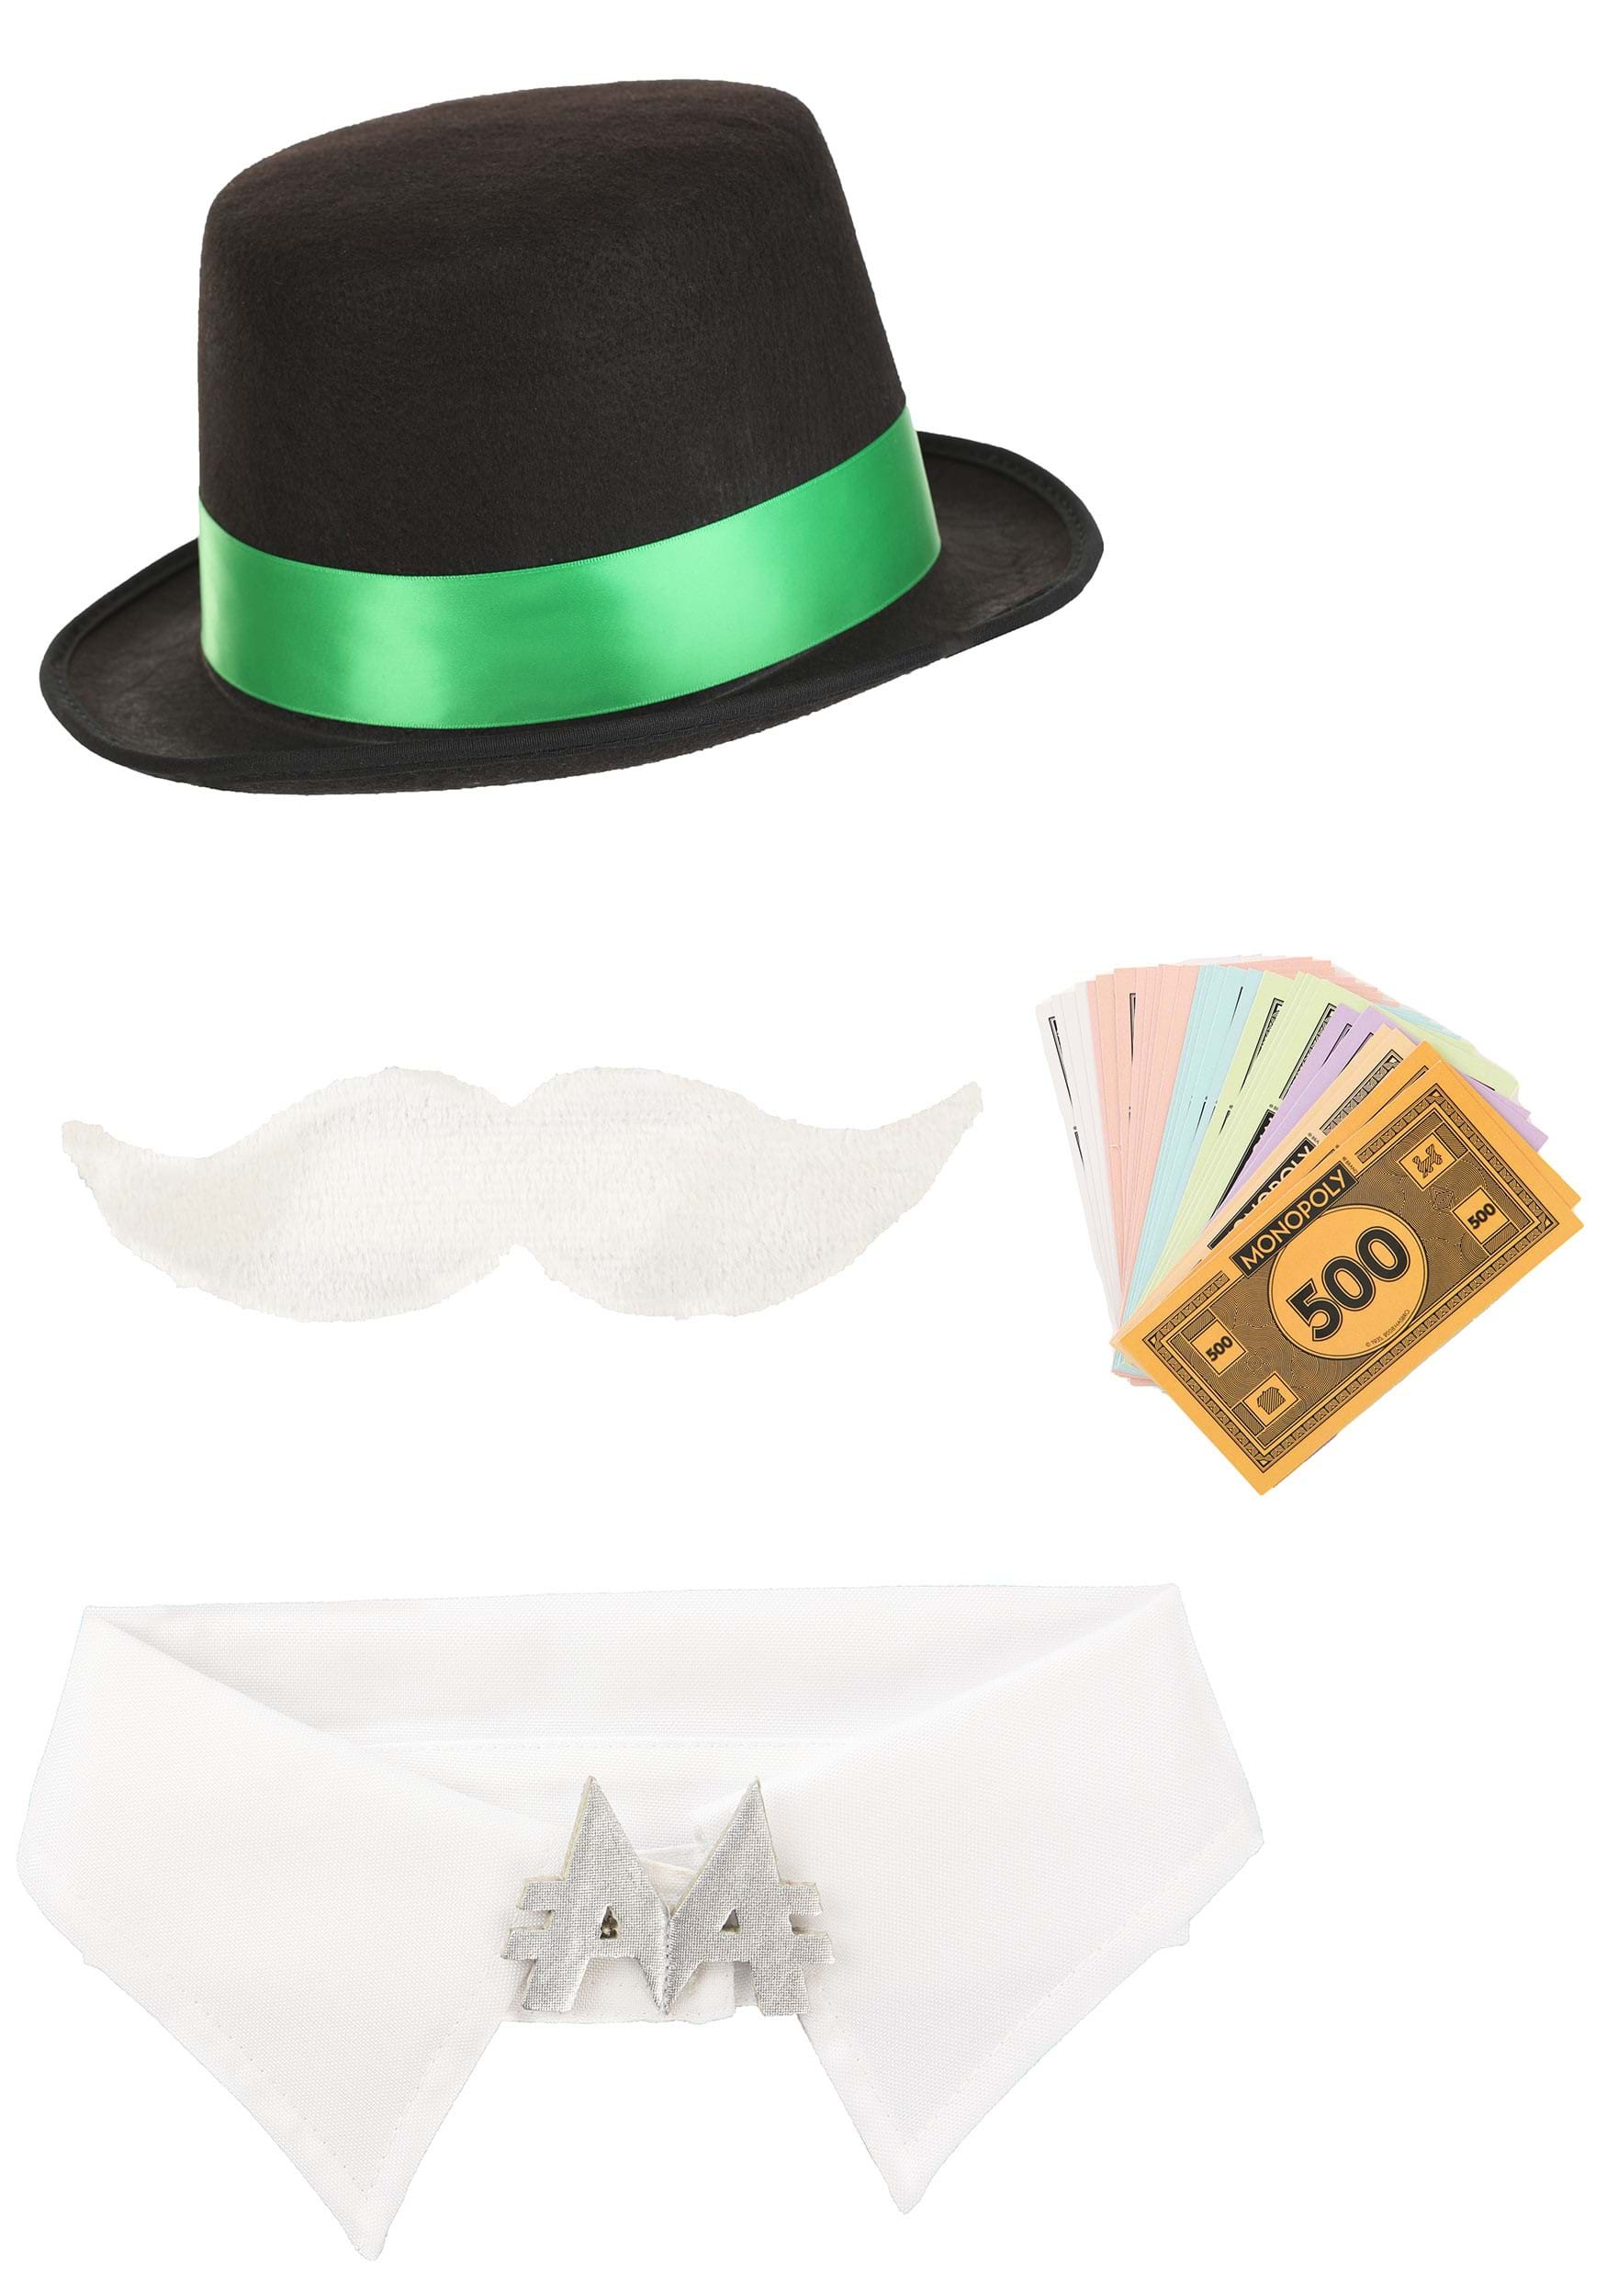 Monopoly Man Costume Kit For Adults